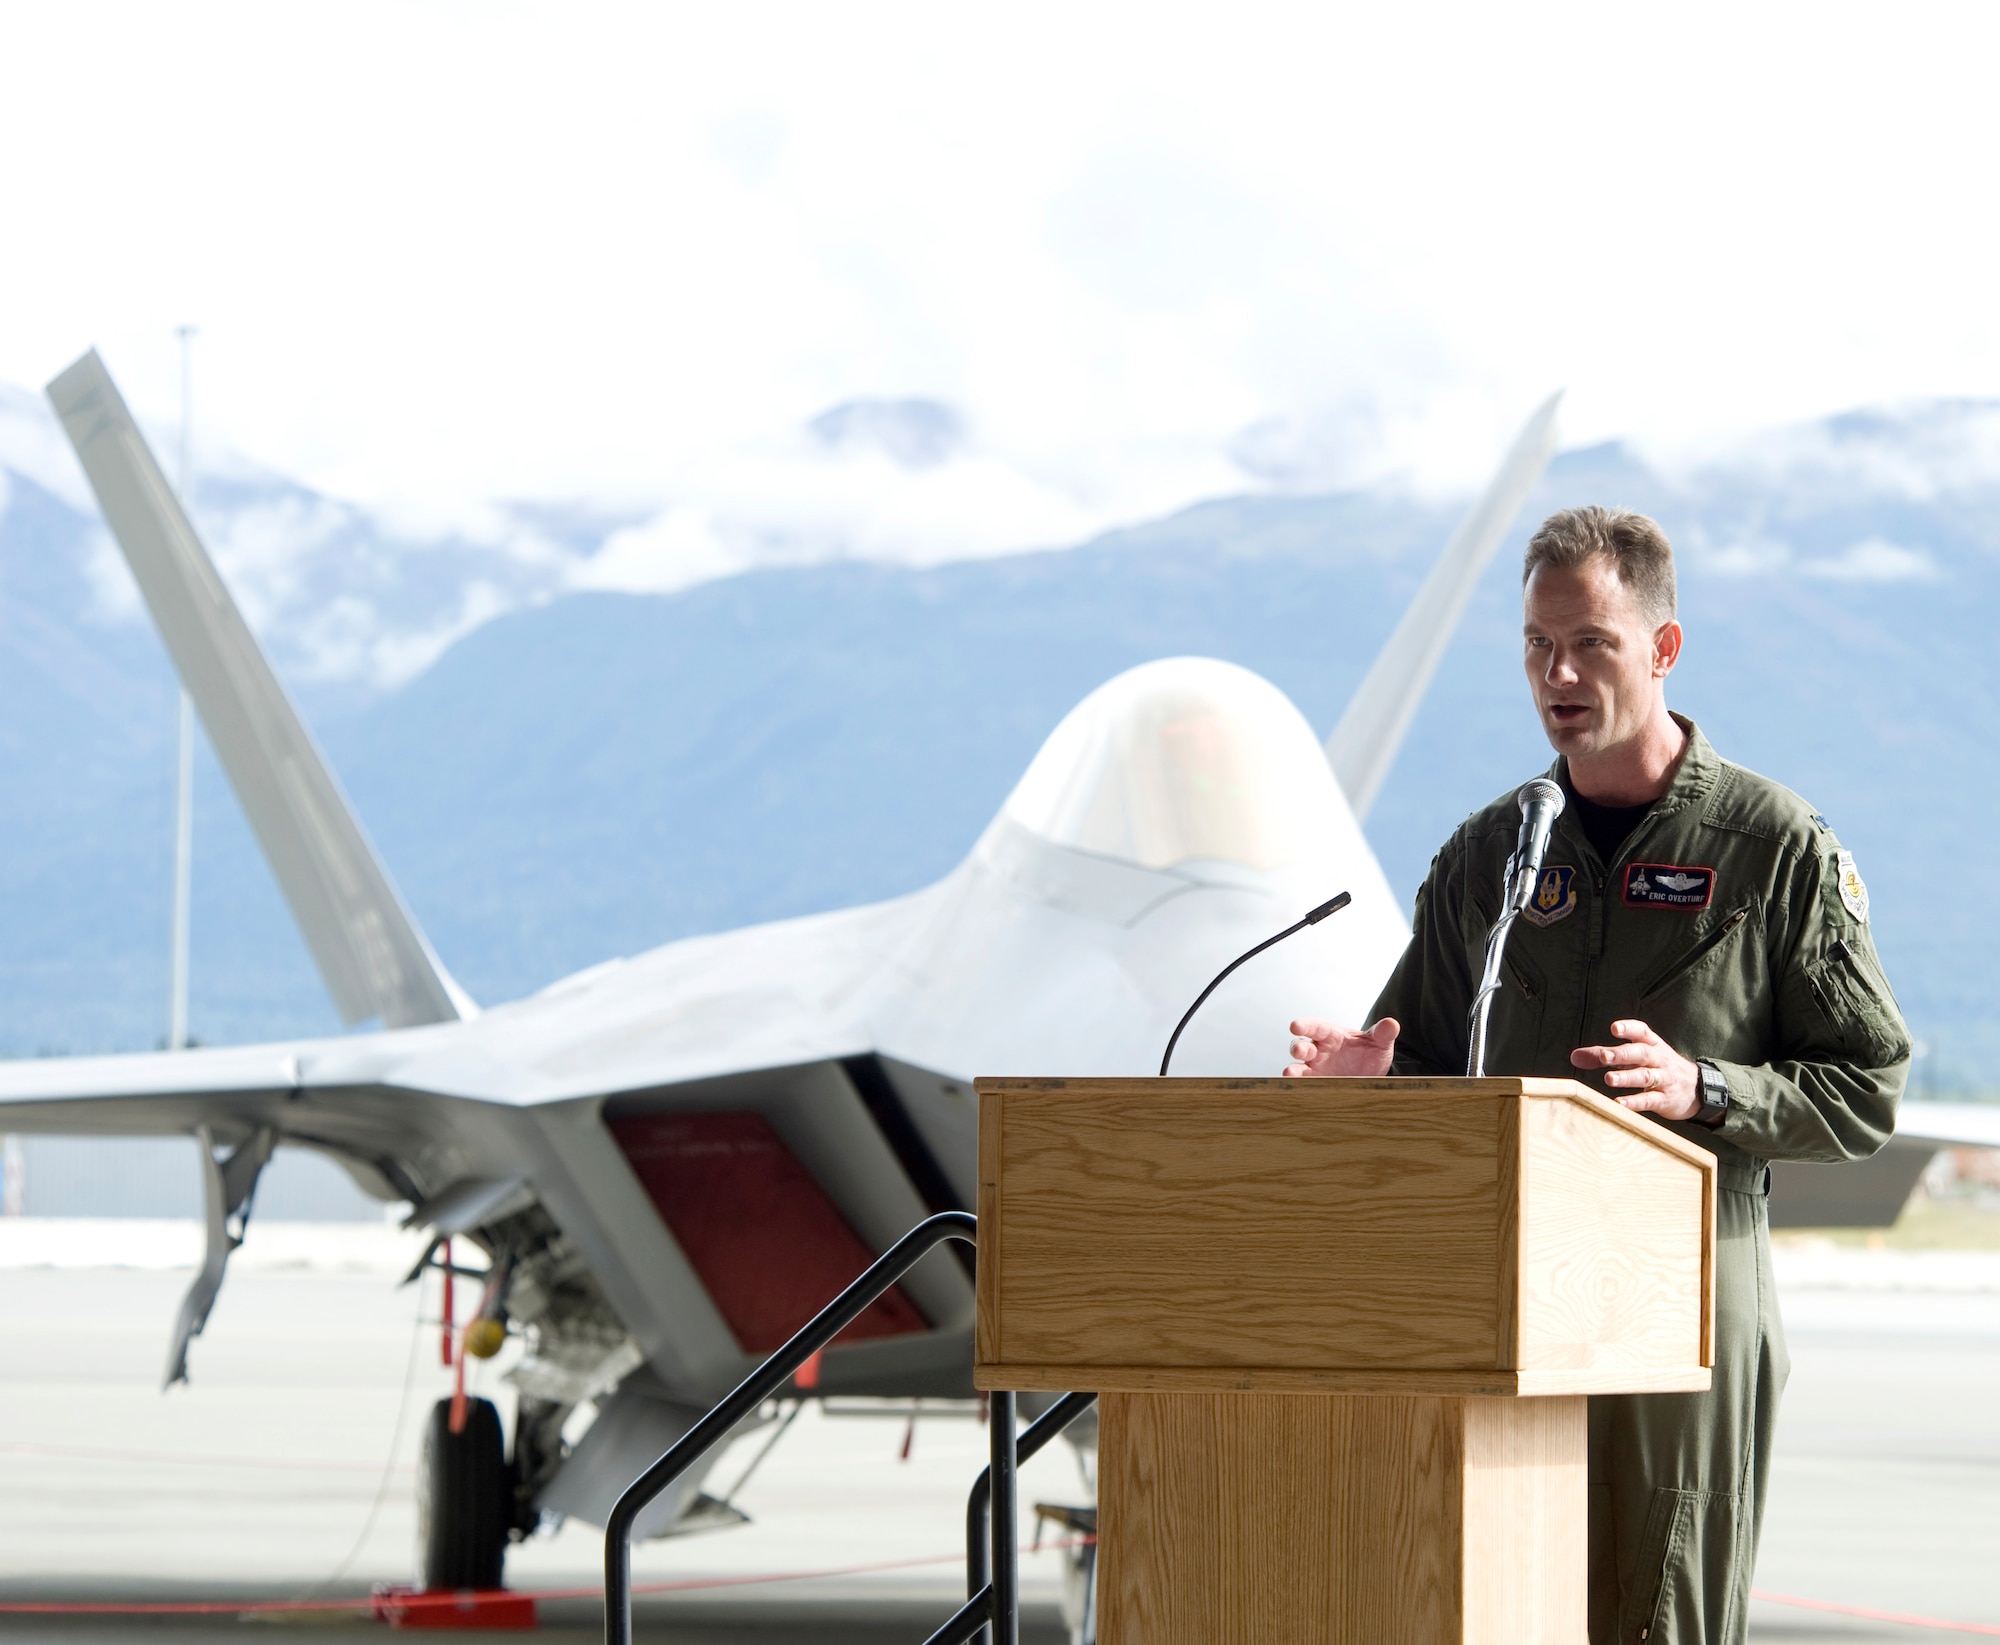 ELMENDORF AIR FORCE BASE, Alaska -- Col. Eric Overturf, 477th Fighter Group commander, speaks to the attendants of the Inital Operational Capabiltiy ceremony Sept. 5. The ceremony was held to celebrate the combat capability of the C-17 Globemaster III and the F-22A Raptor. (U.S. Air Force photo/Senior Airman Matthew Owens)